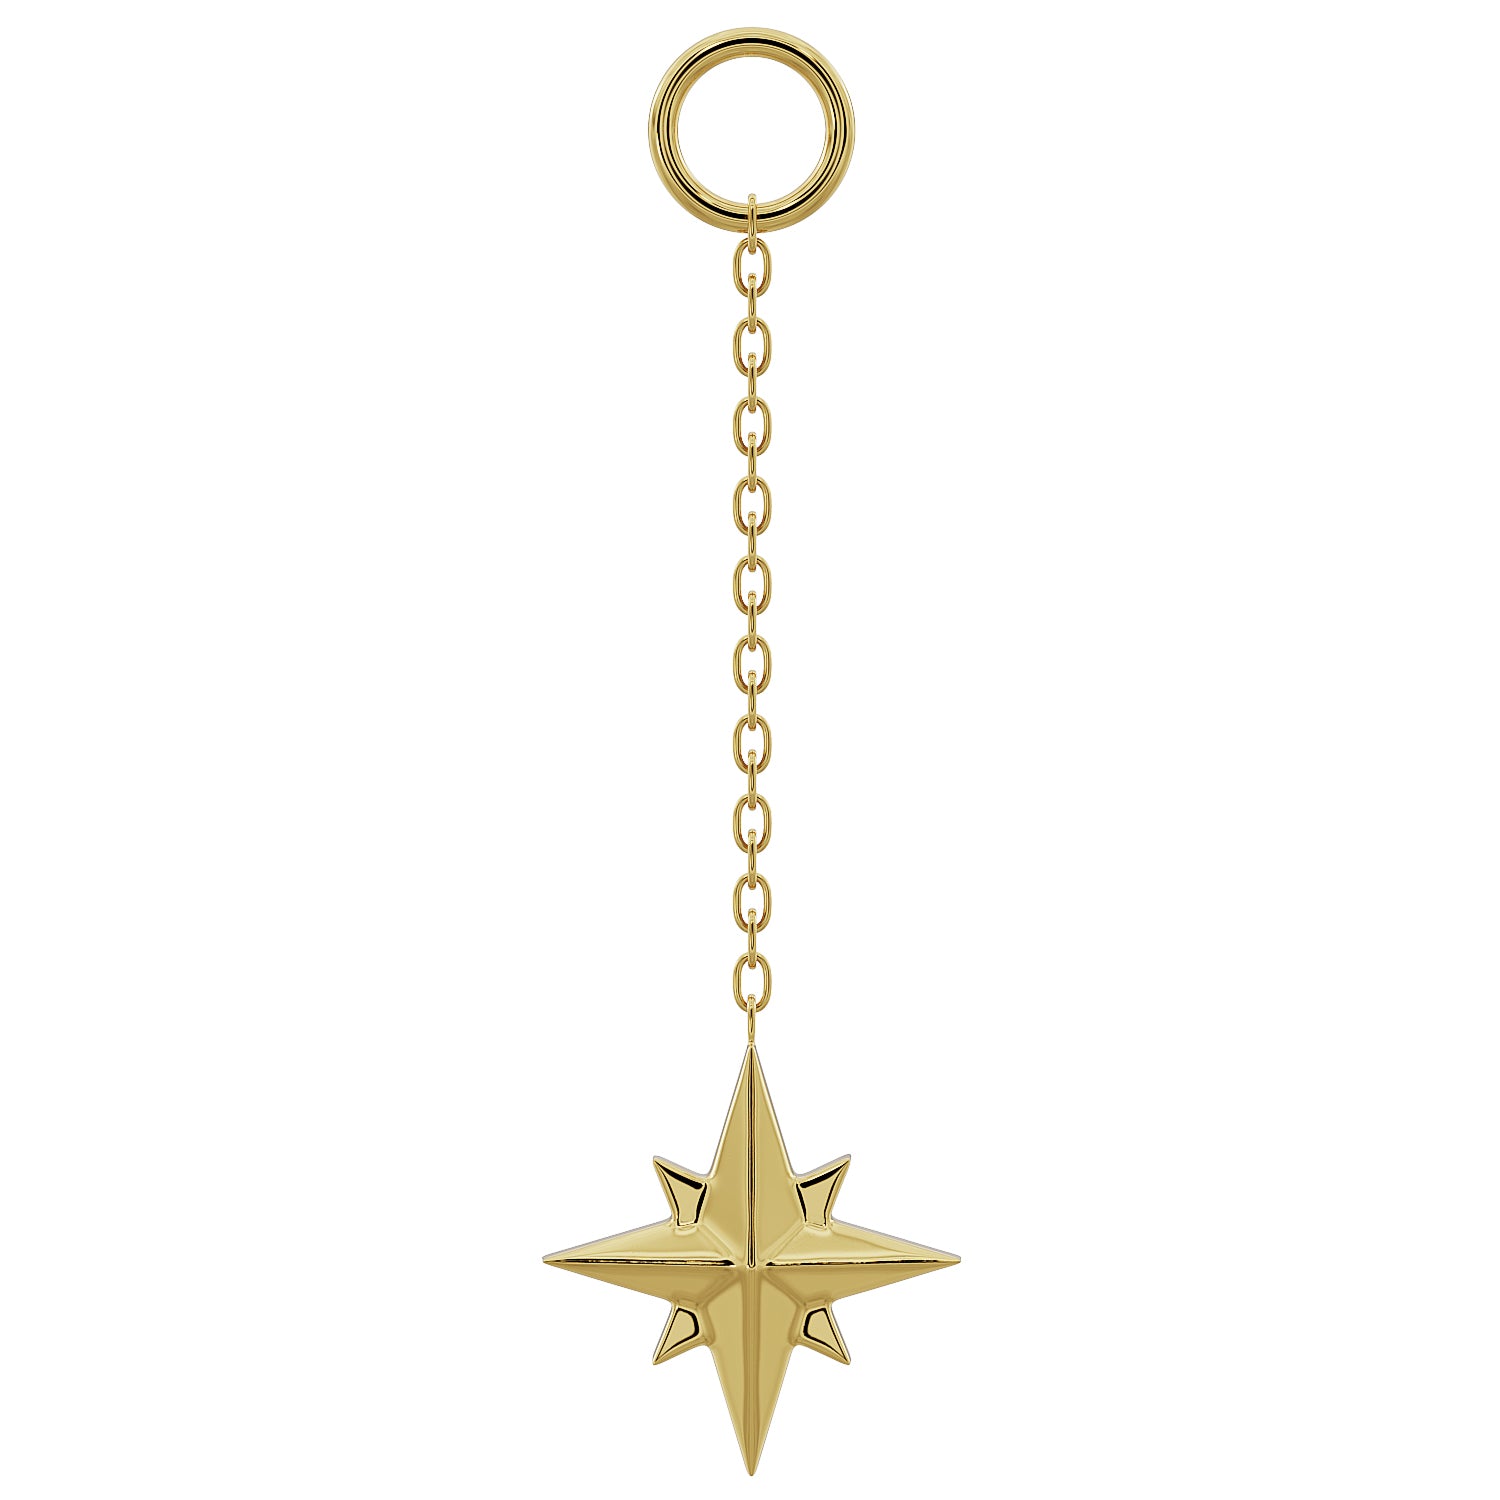 North Star Chain Accessory-Long   14K Yellow Gold